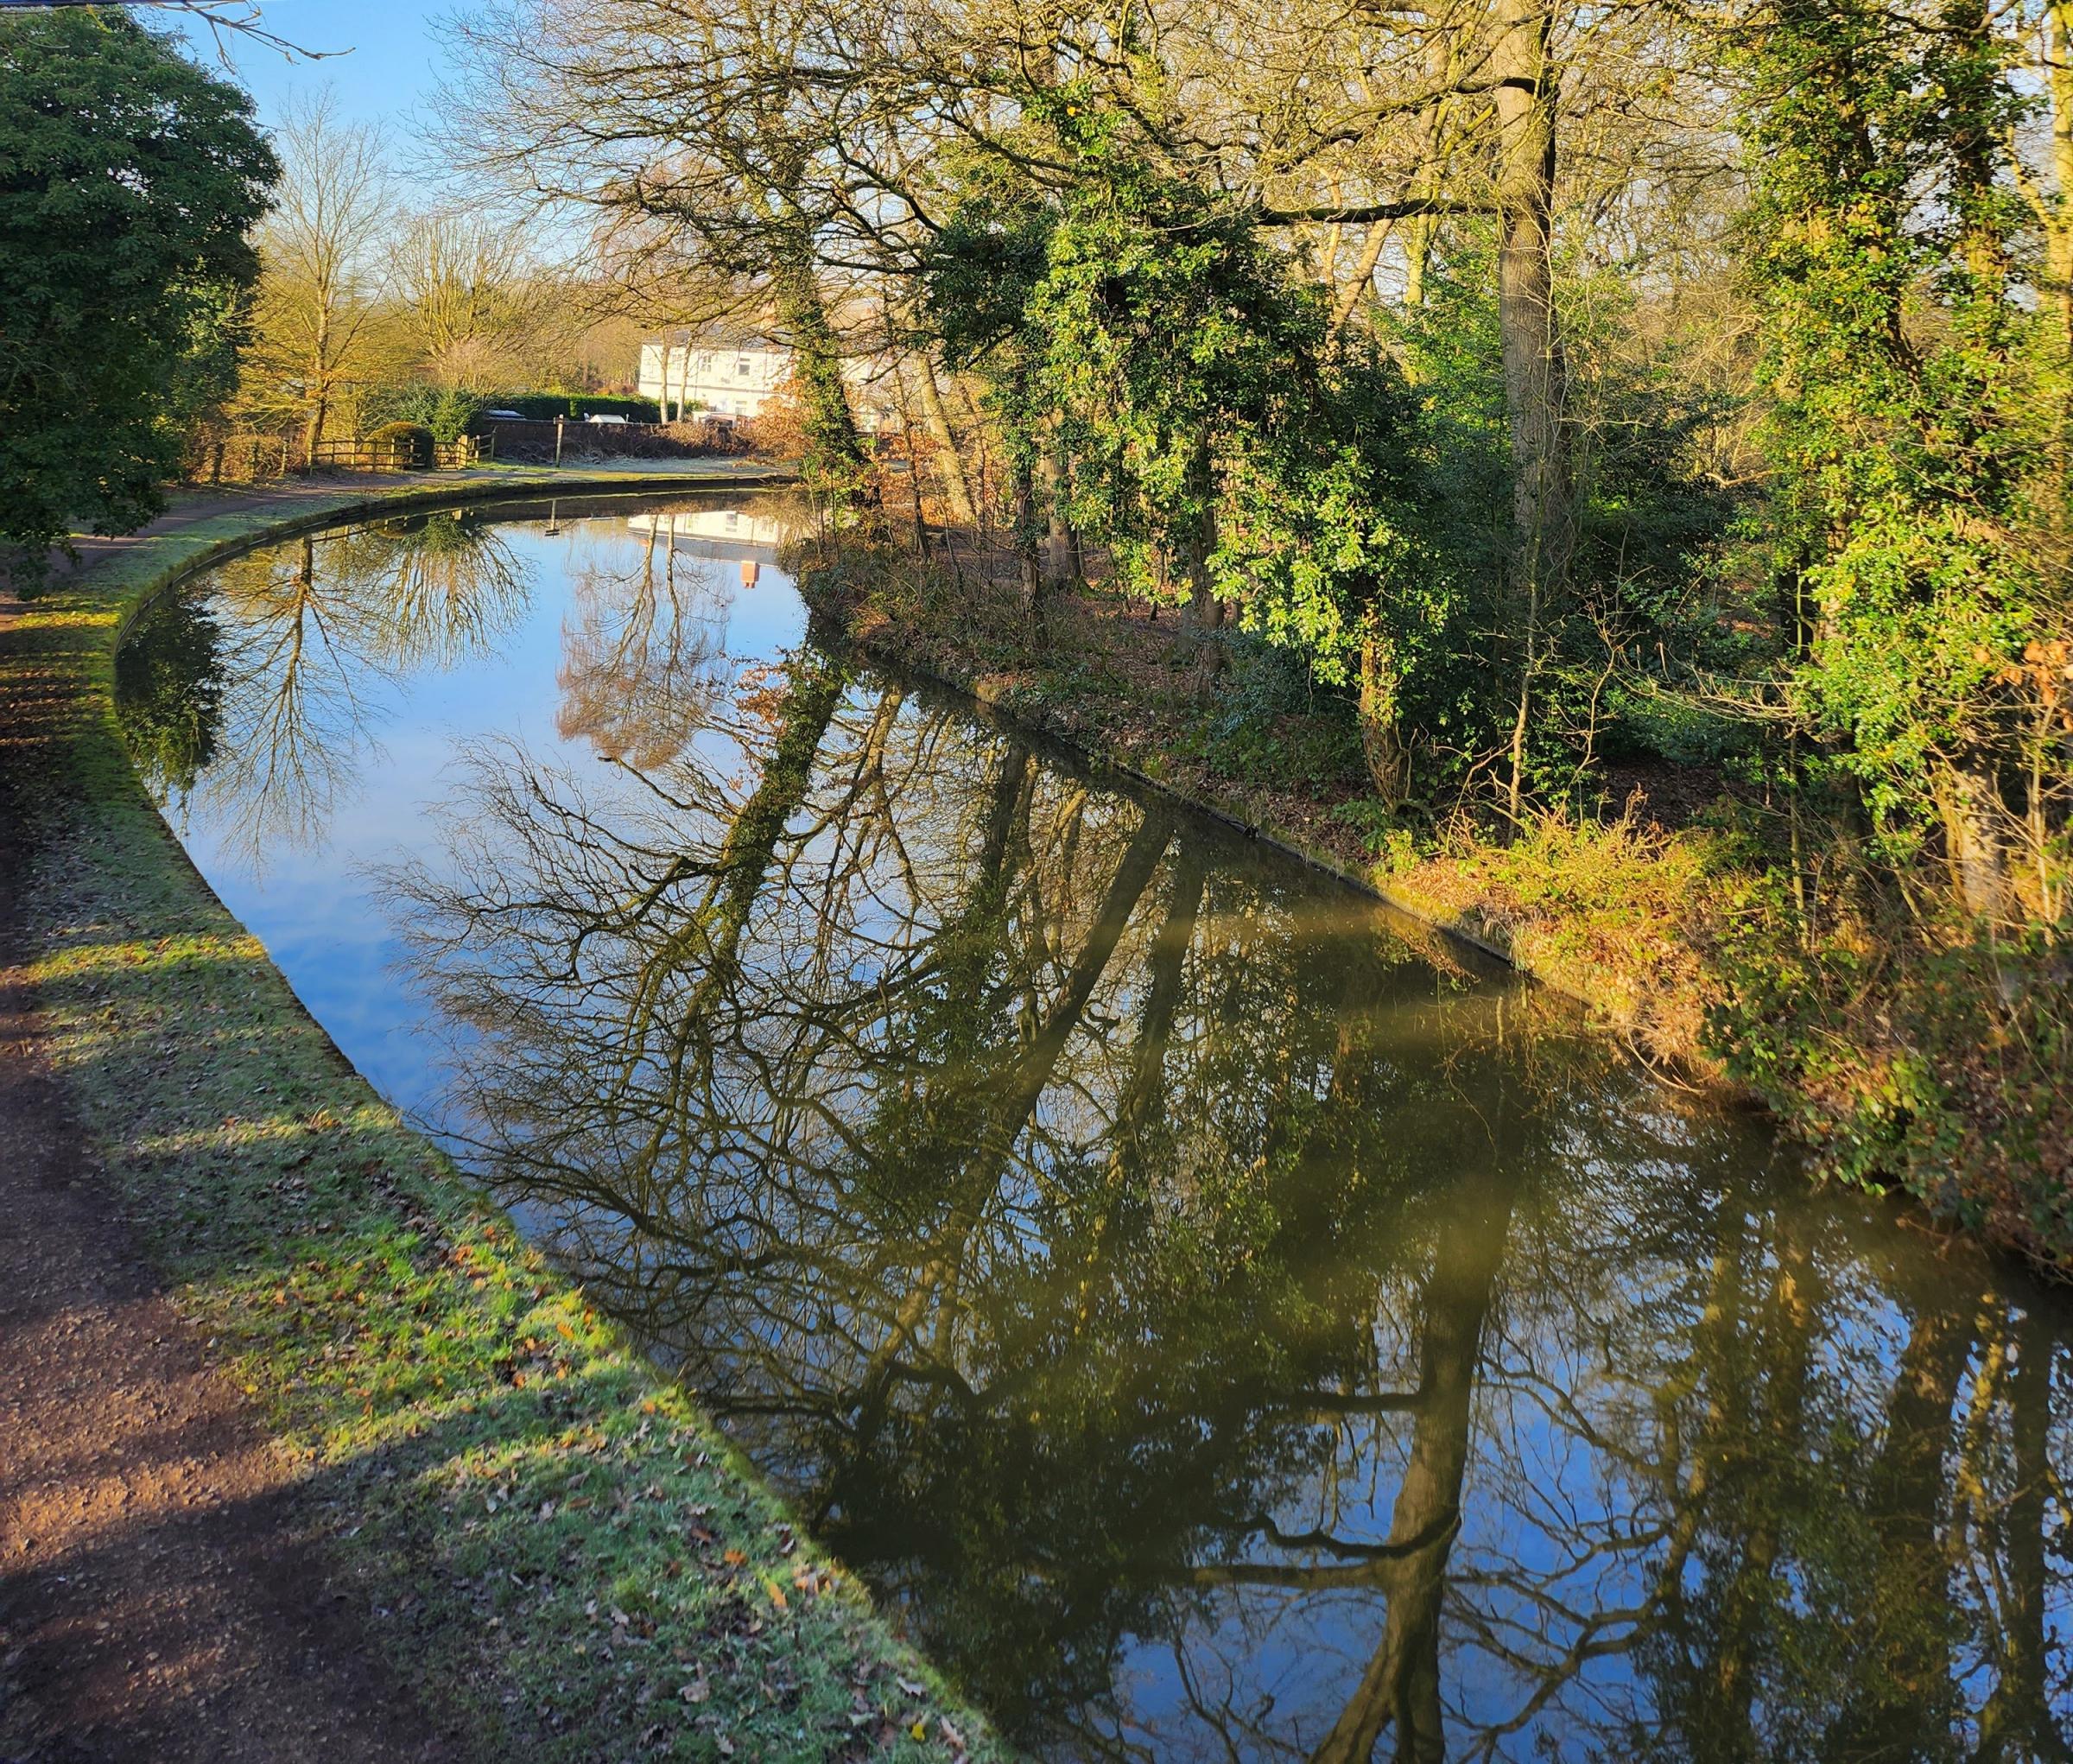 Reflection on the canal, Marbury Park